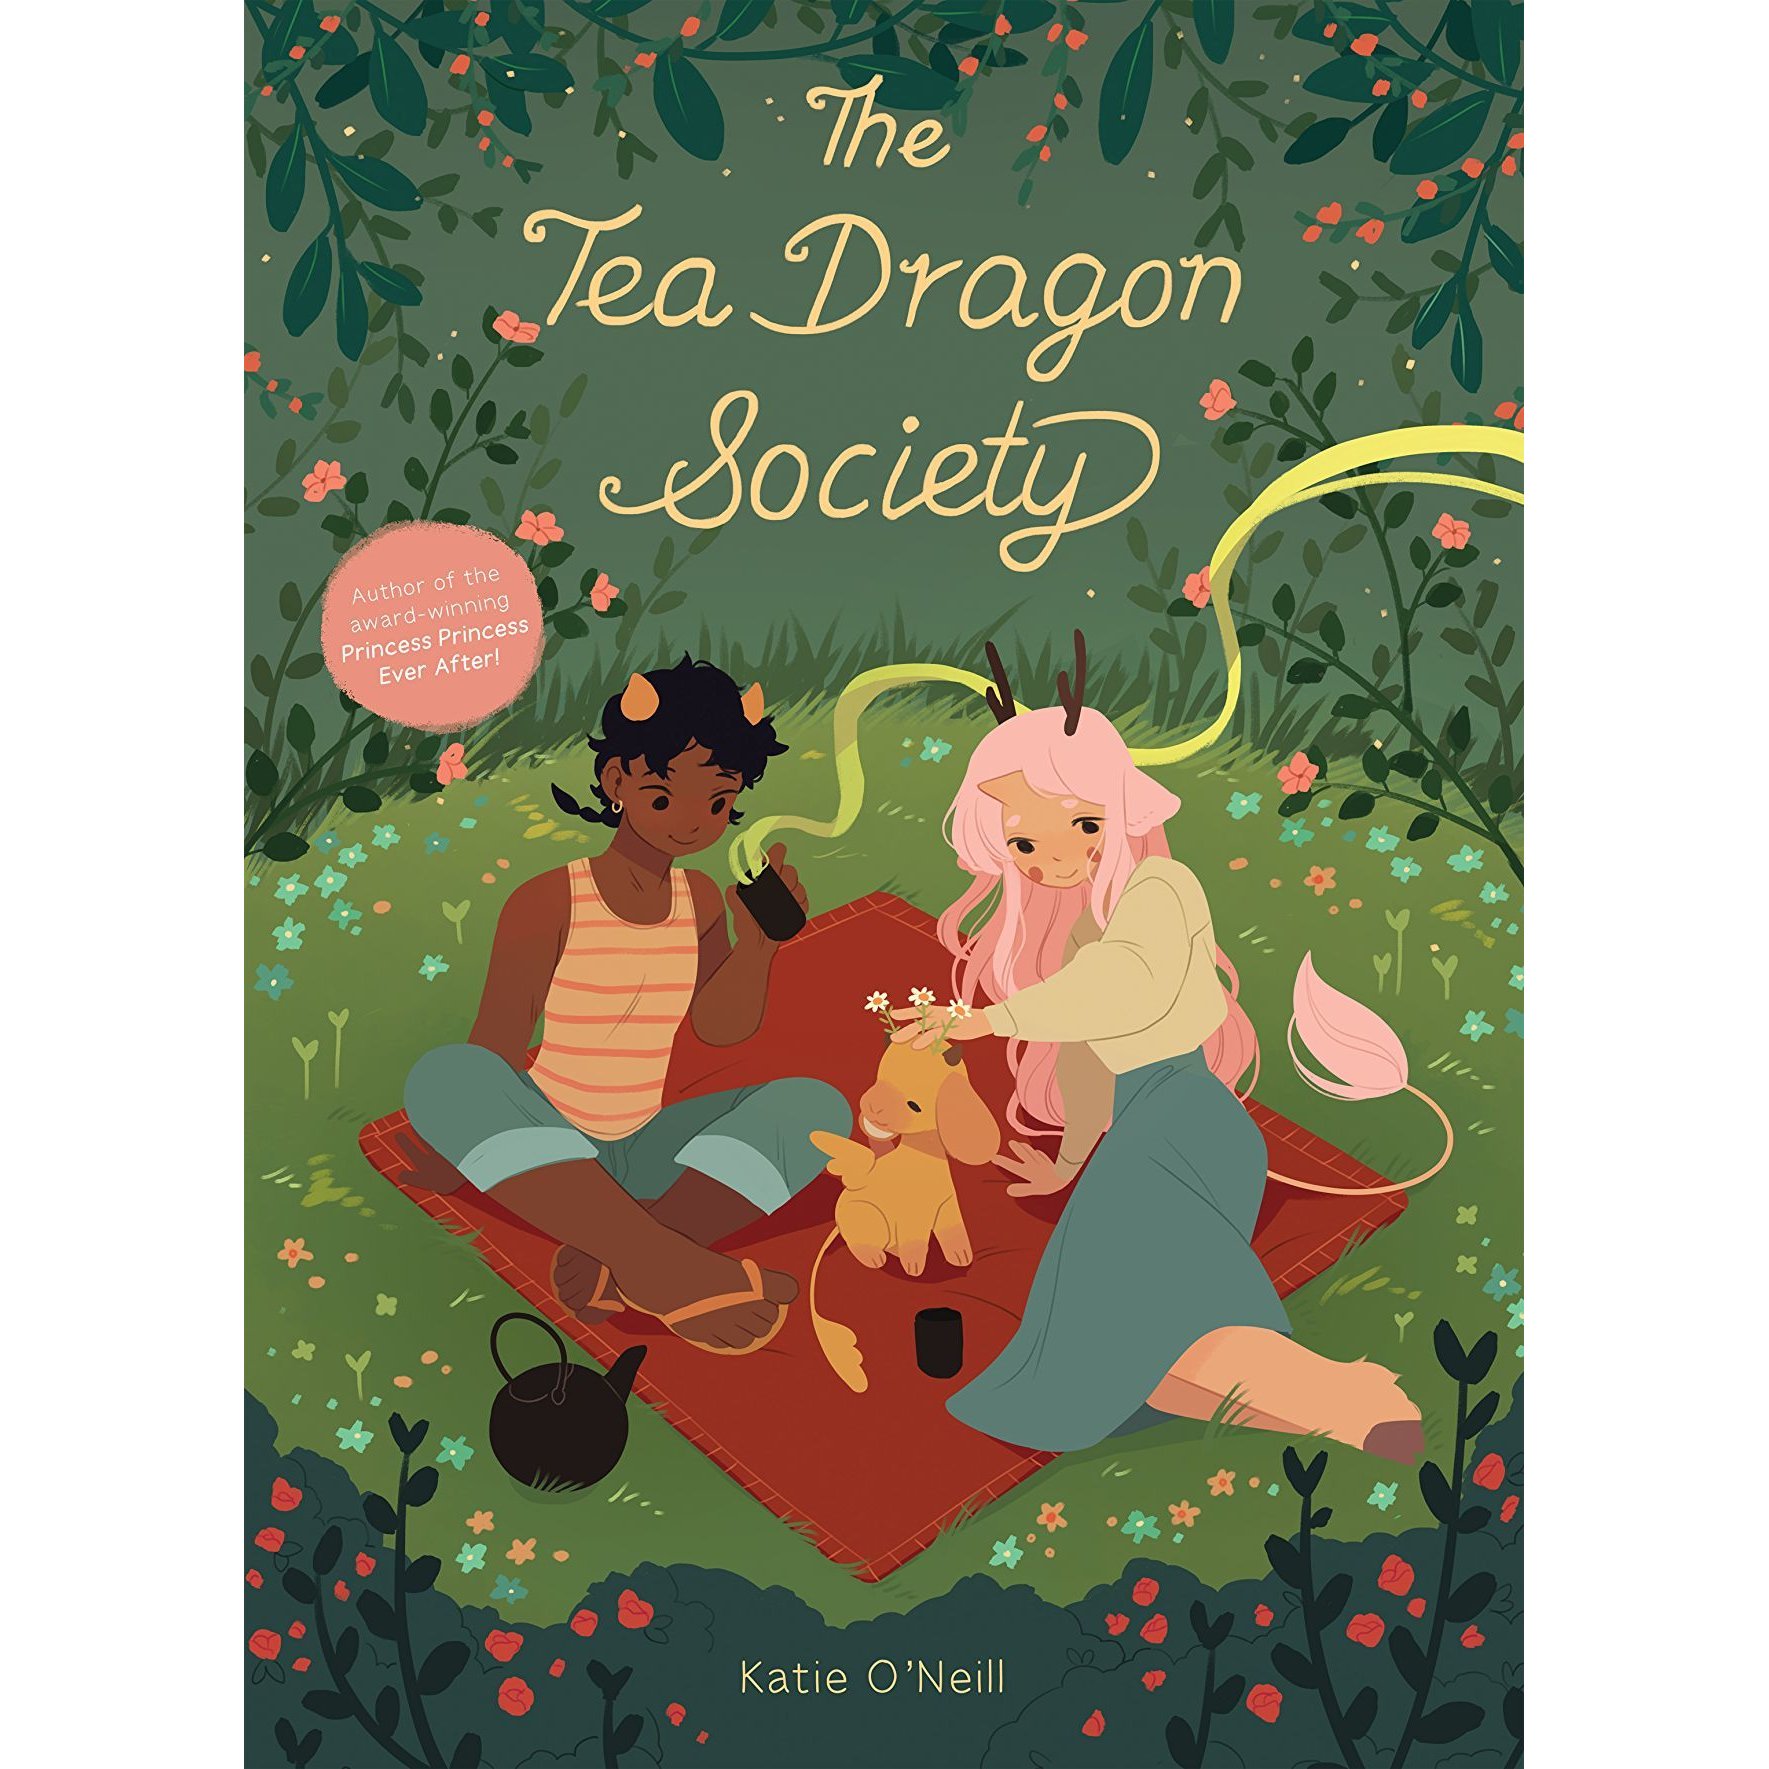 Cover of the book "The Tea Dragon Society" showing two girls in a magical universe having a picnic with a tea dragon.